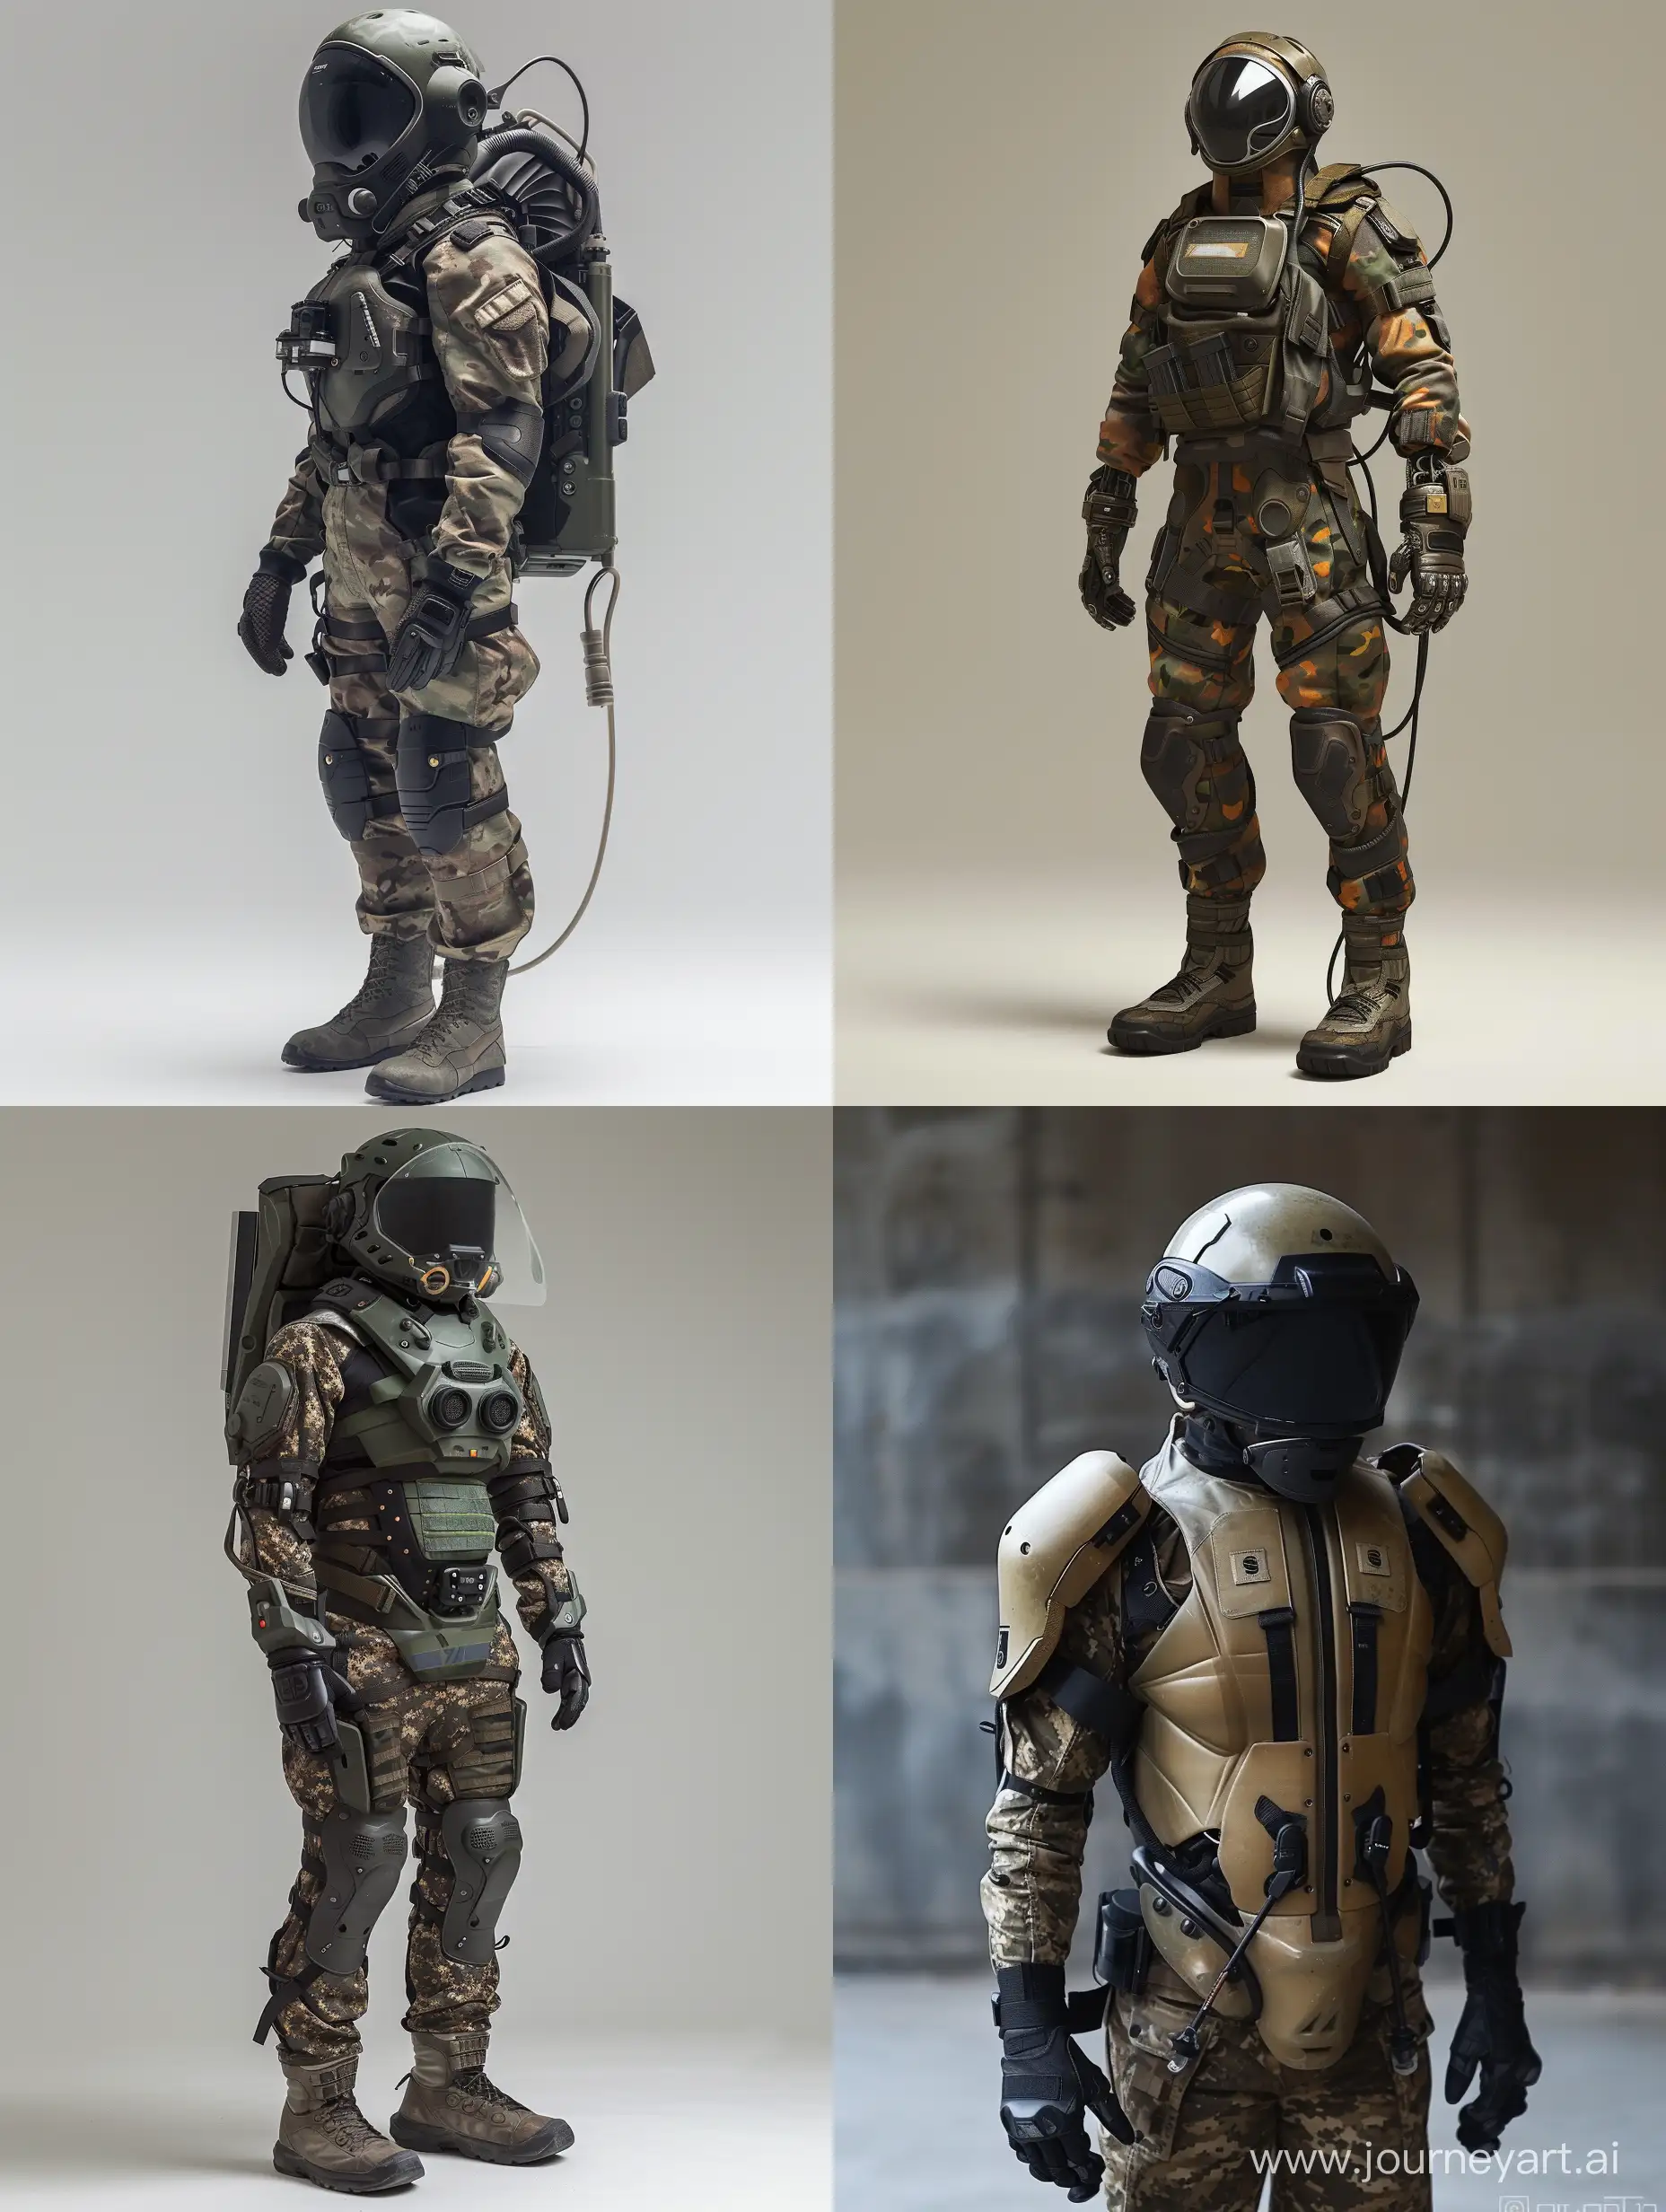 Futuristic-Cybernetic-Soldier-in-Olive-Camouflage-Power-Armor